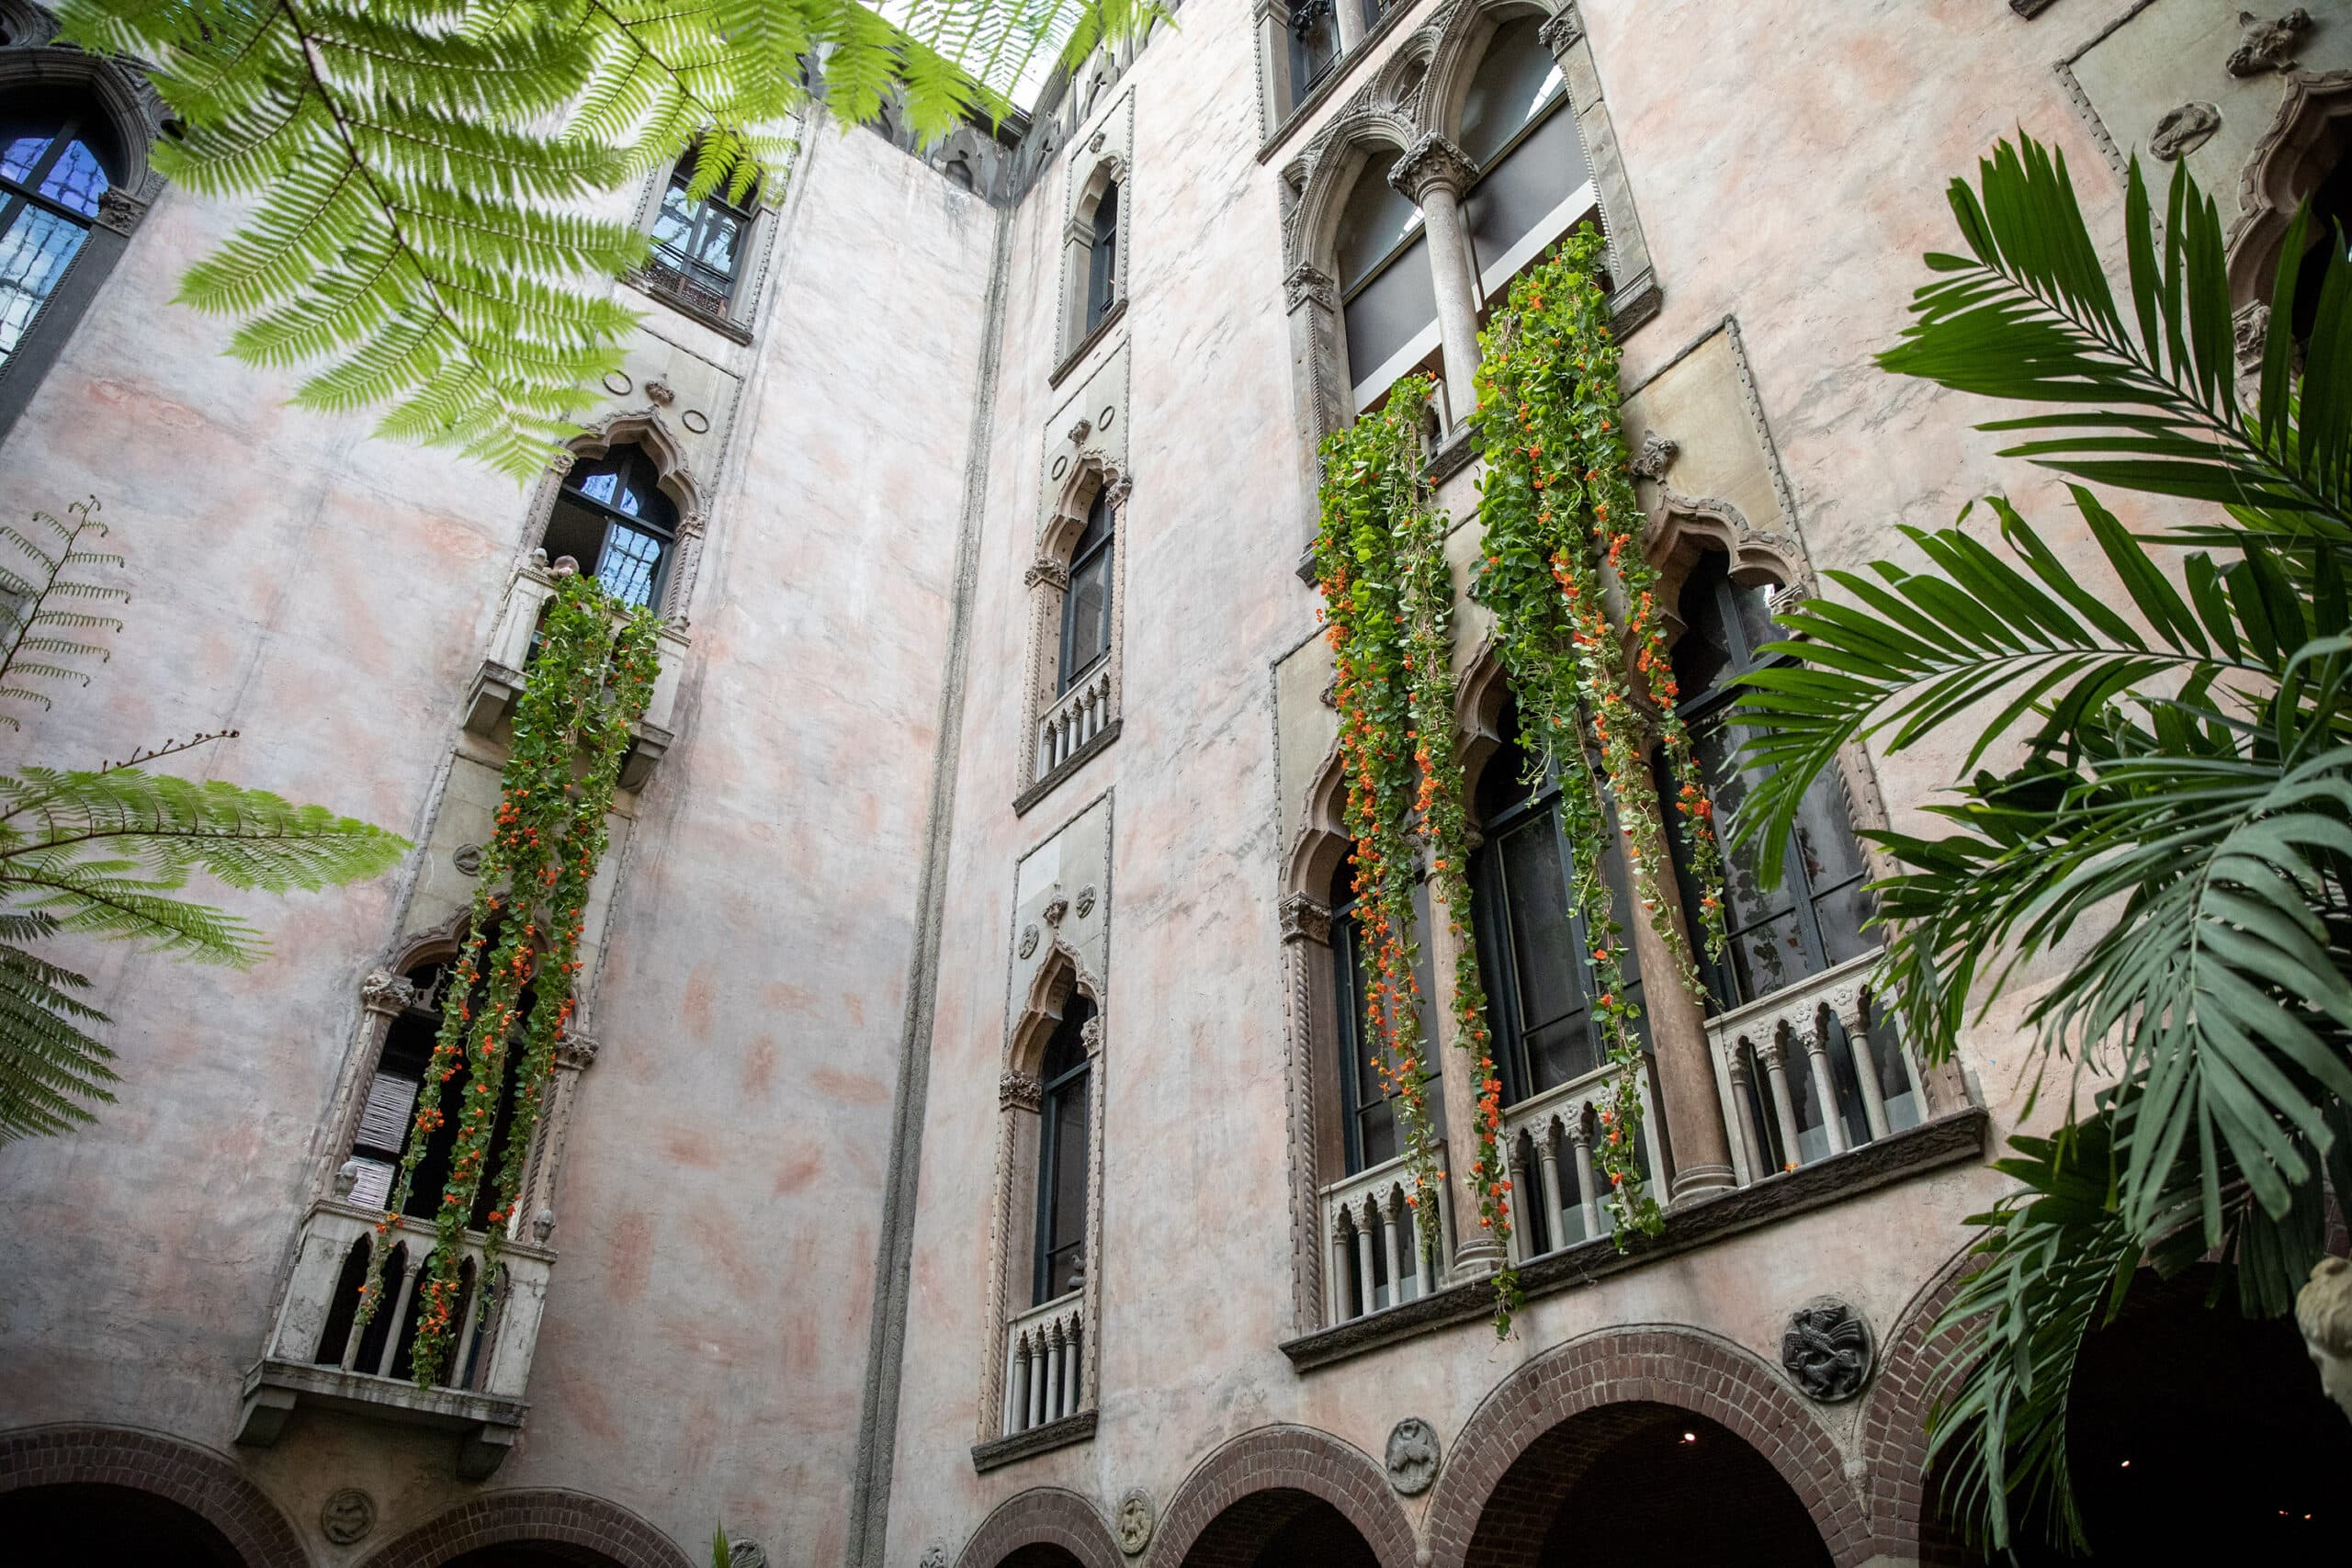 Nasturtium plants hang down from the windows in the courtyard of the Isabella Stewart Gardner Museum, during the annual Hanging Nasturtiums installation. (Robin Lubbock/WBUR)